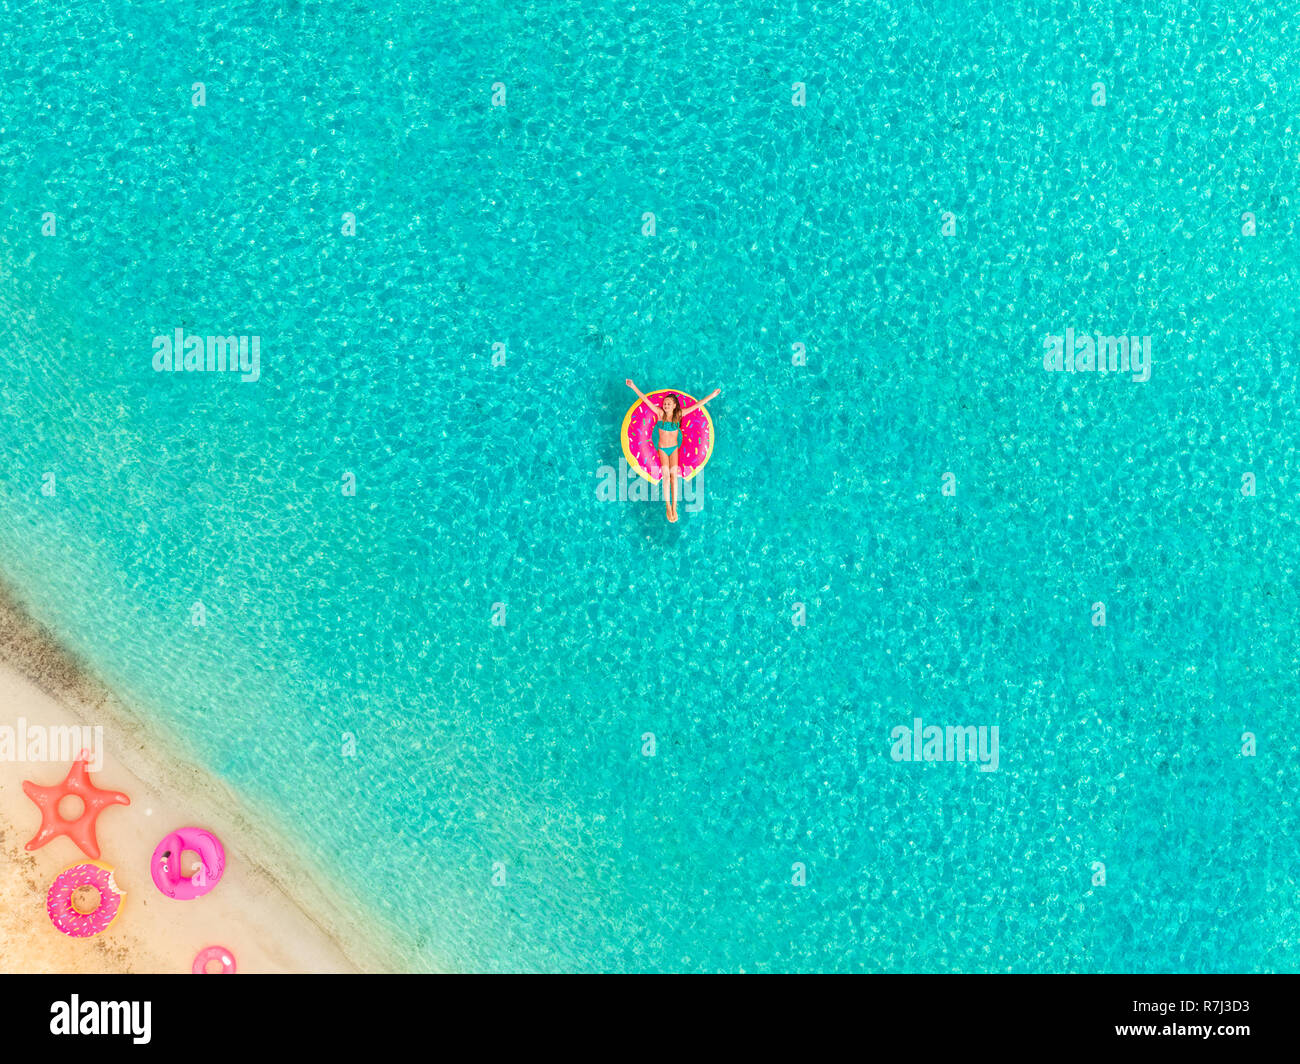 Aerial view of girl floating on inflatable donut mattress by sandy beach and inflatable rings. Stock Photo